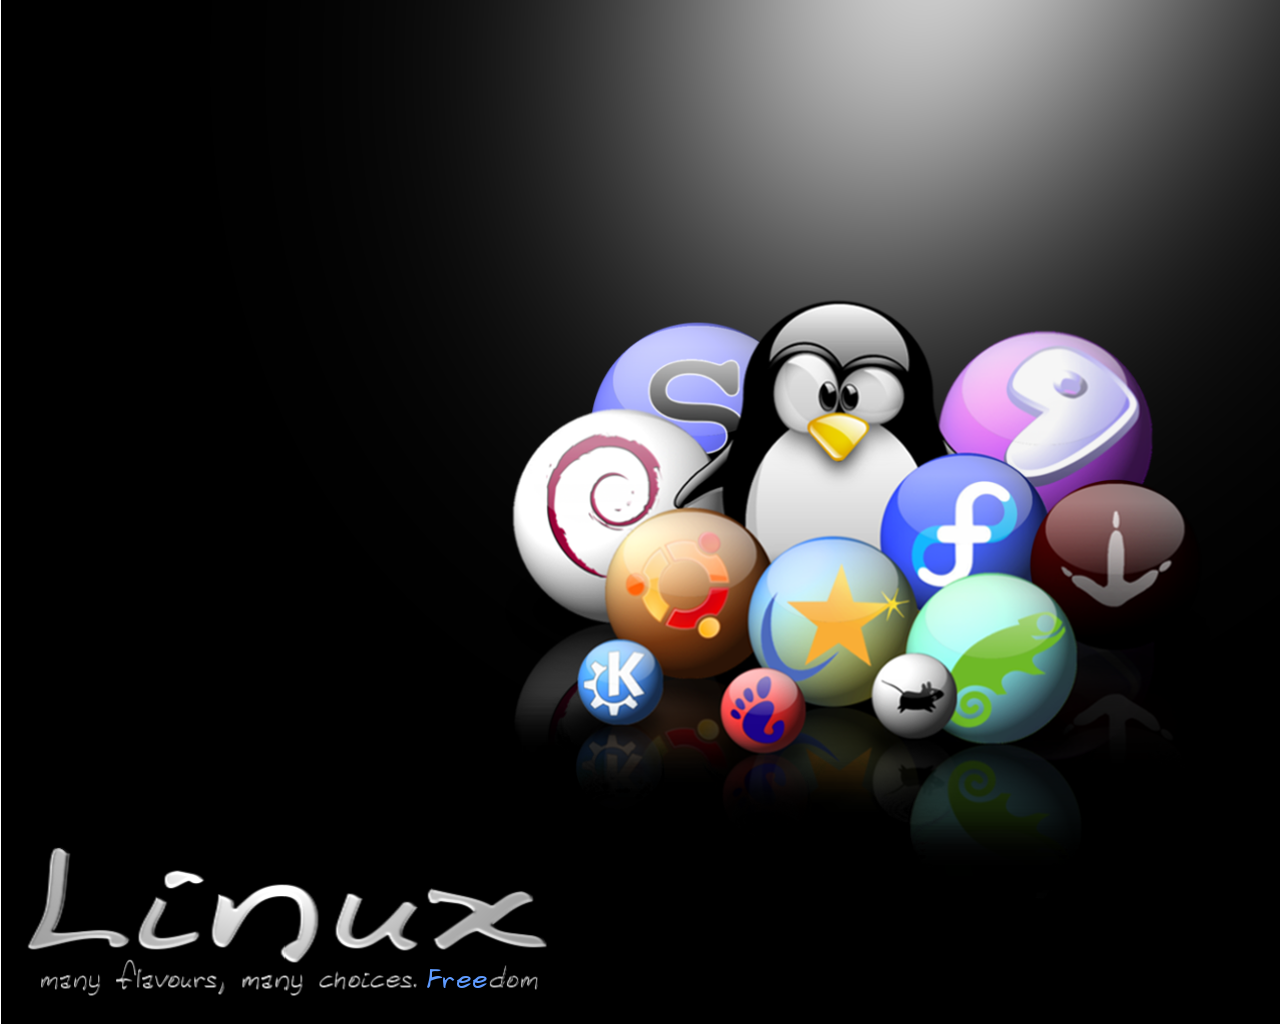 Cool Linux Wallpapers - Wallpaper Cave